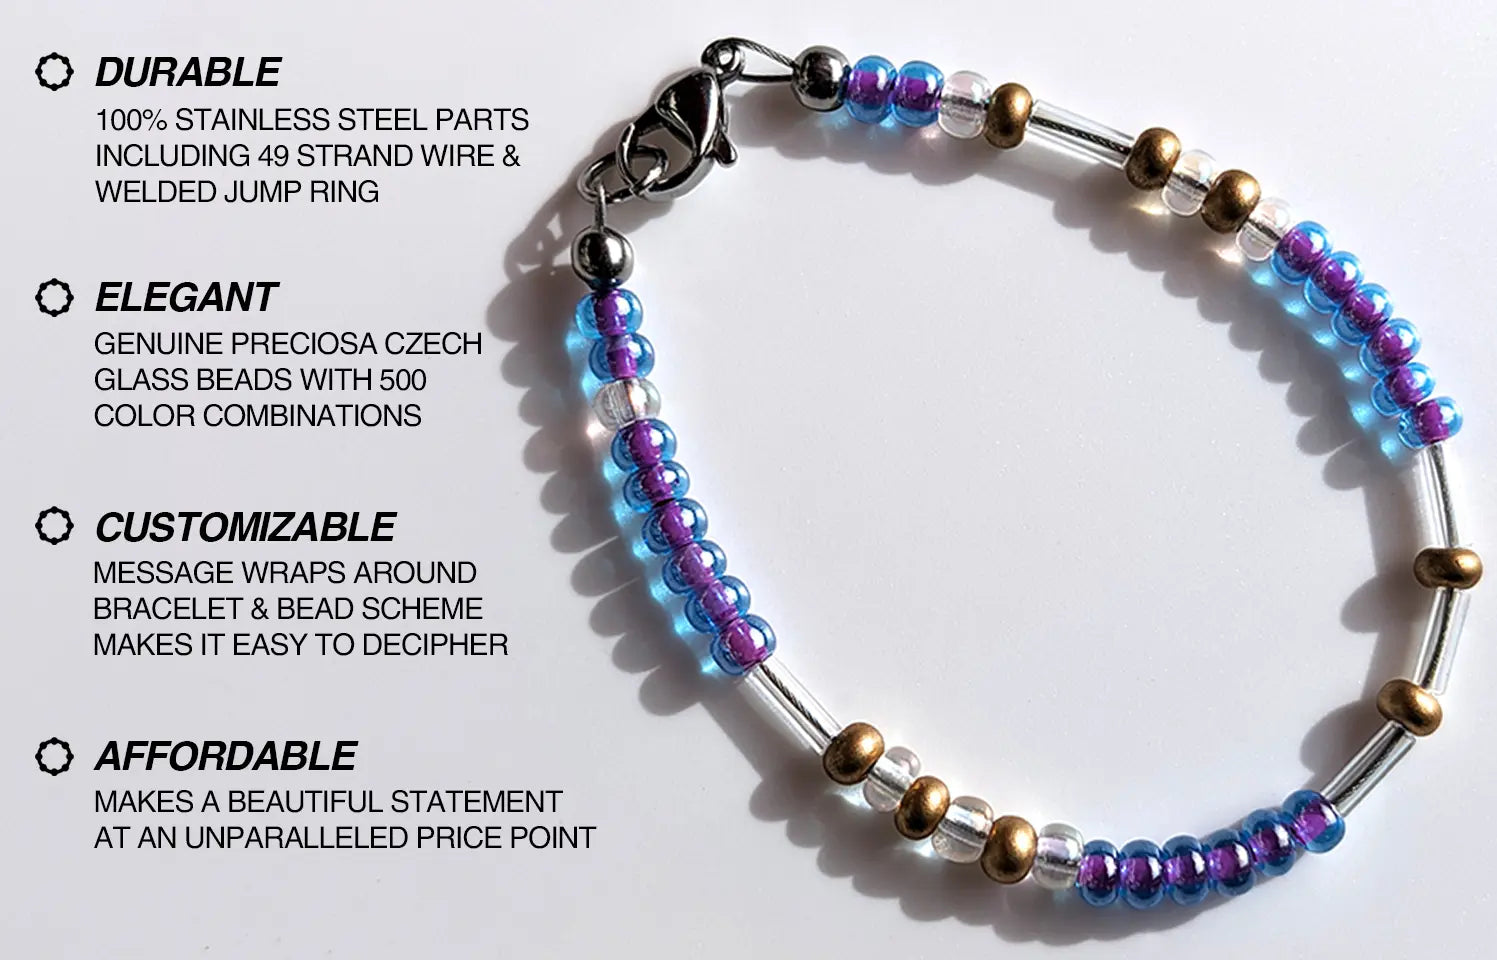 On the right is our beautiful Smoothie Glitter Morse code bracelet, on the left are its key features including Durable, Elegant, Customizable, and Affordable.